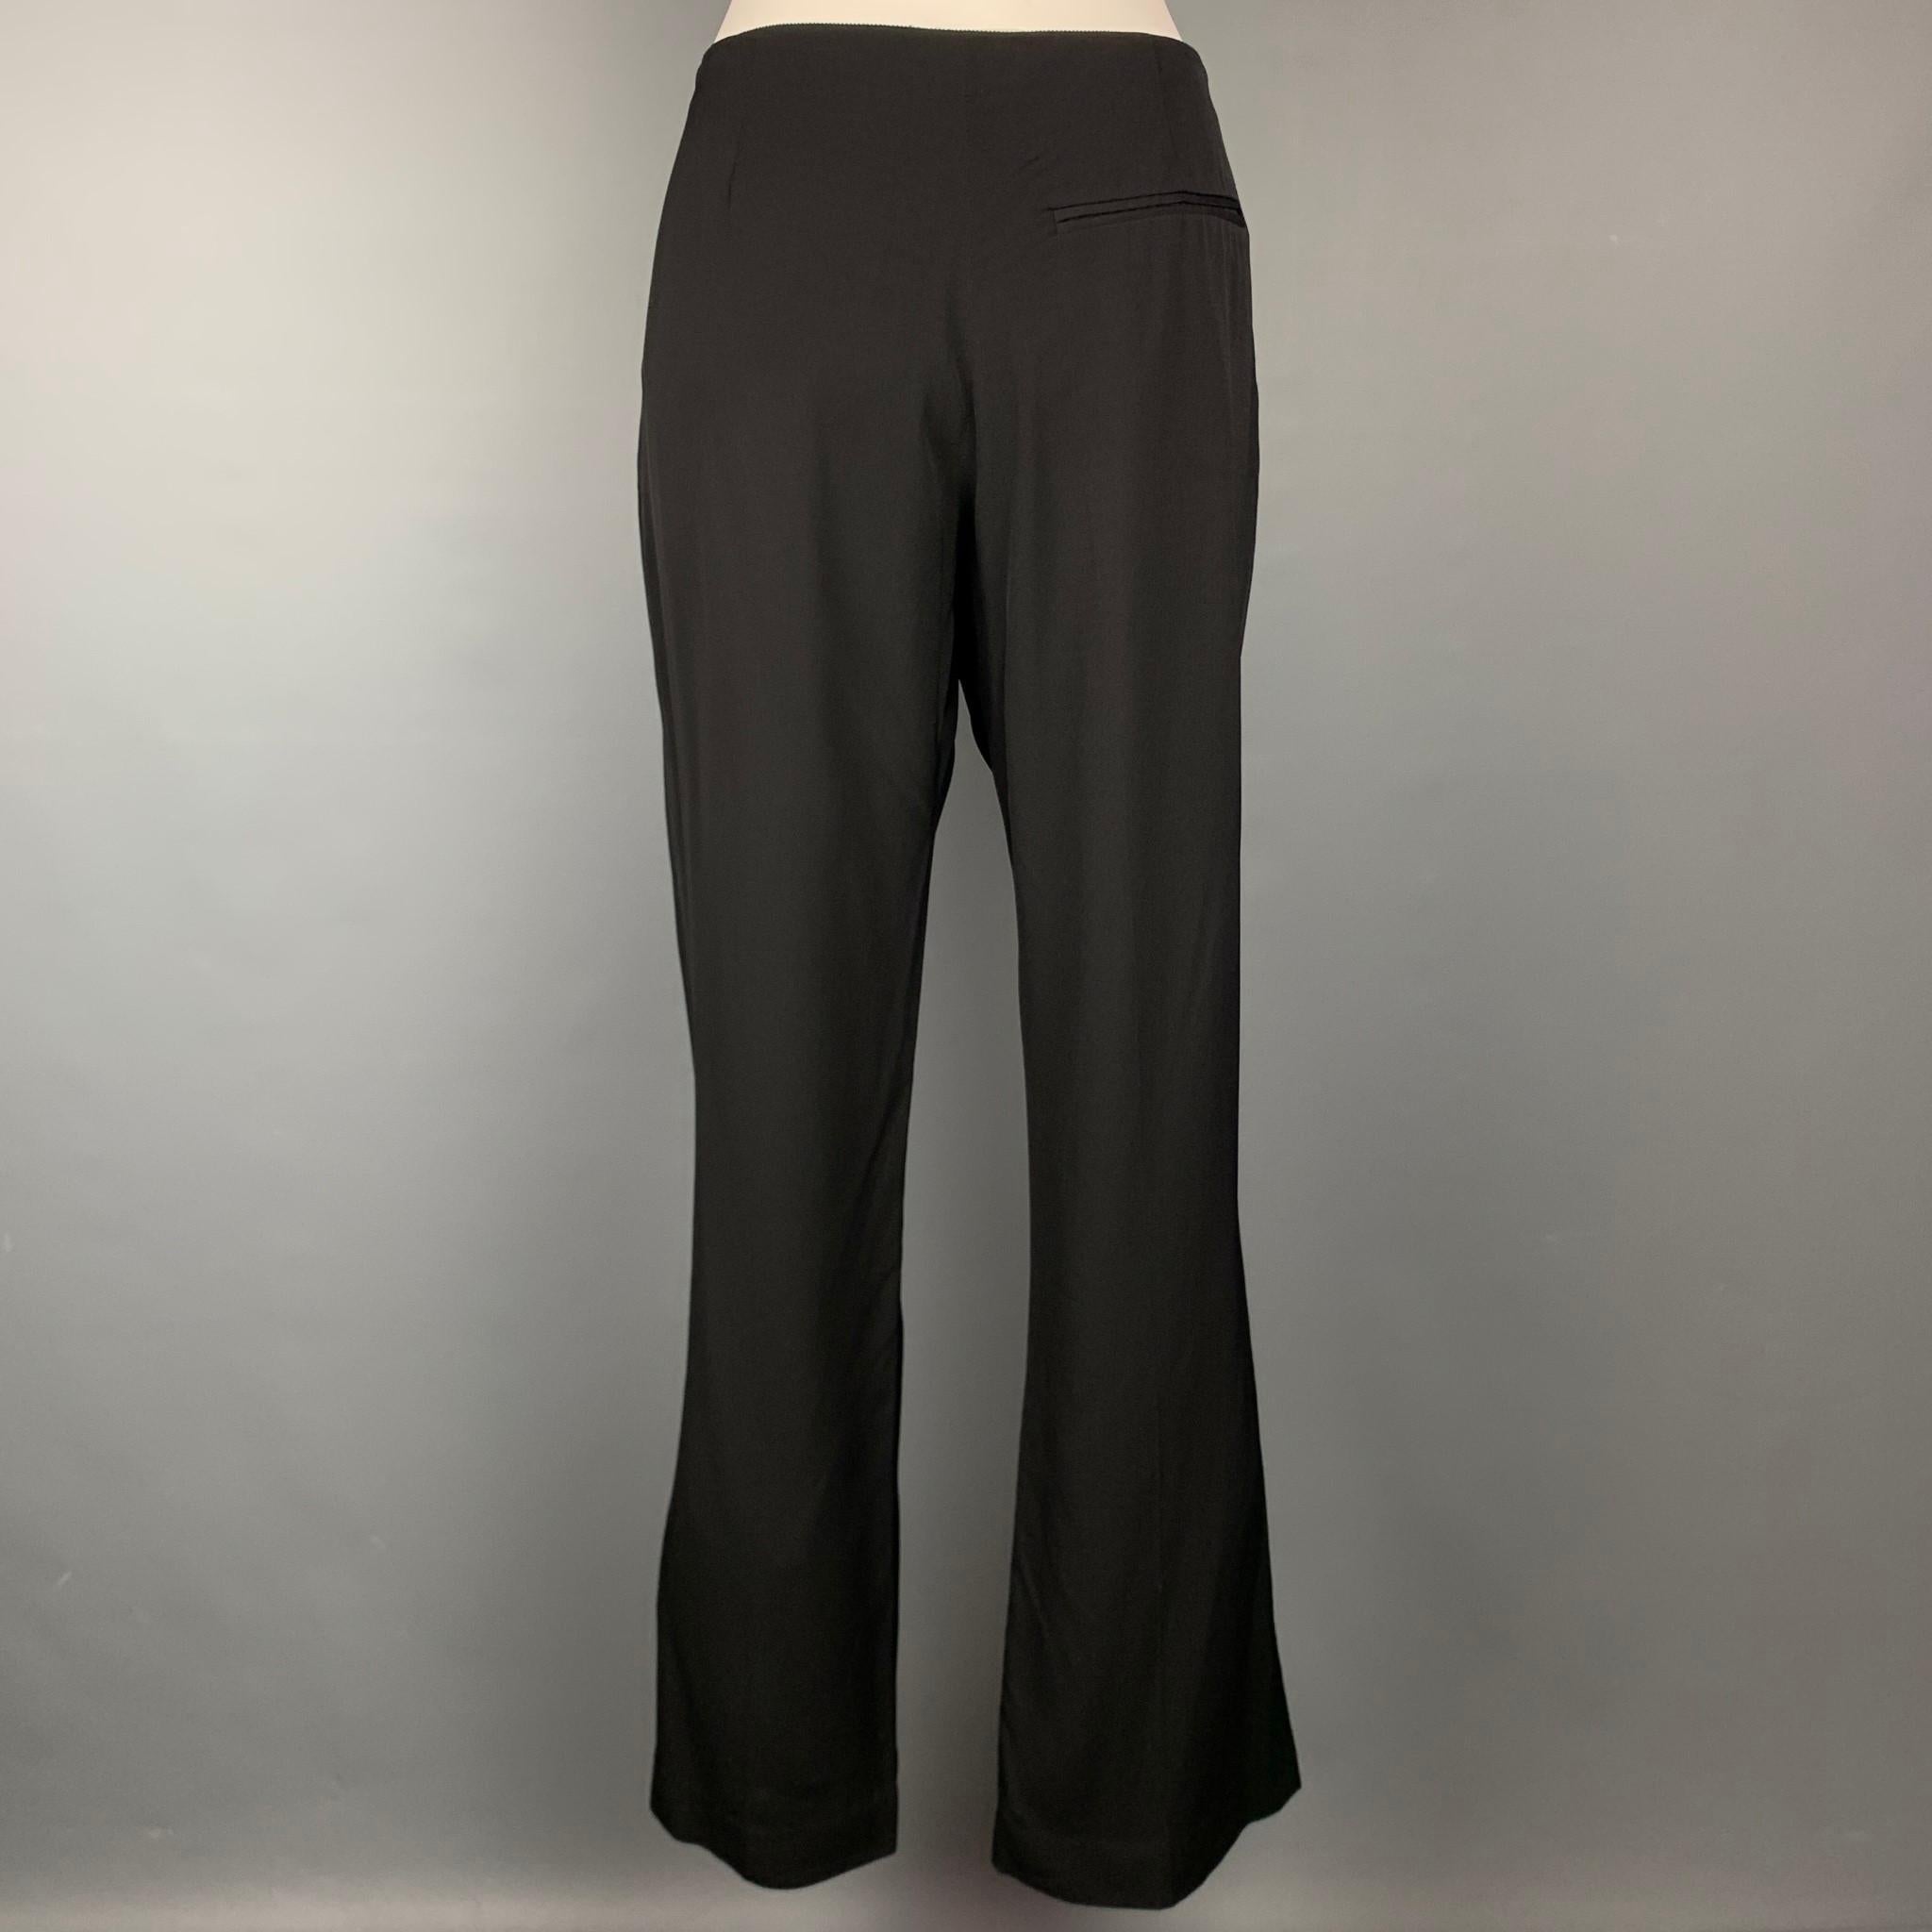 LAVIN 2007 dress pants comes in a black viscose featuring a straight leg, slit pockets, and a zip fly closure. Made in France.

Very Good Pre-Owned Condition.
Marked: 42

Measurements:

Waist: 34 in.
Rise: 8.5 in.
Inseam: 33 in. 